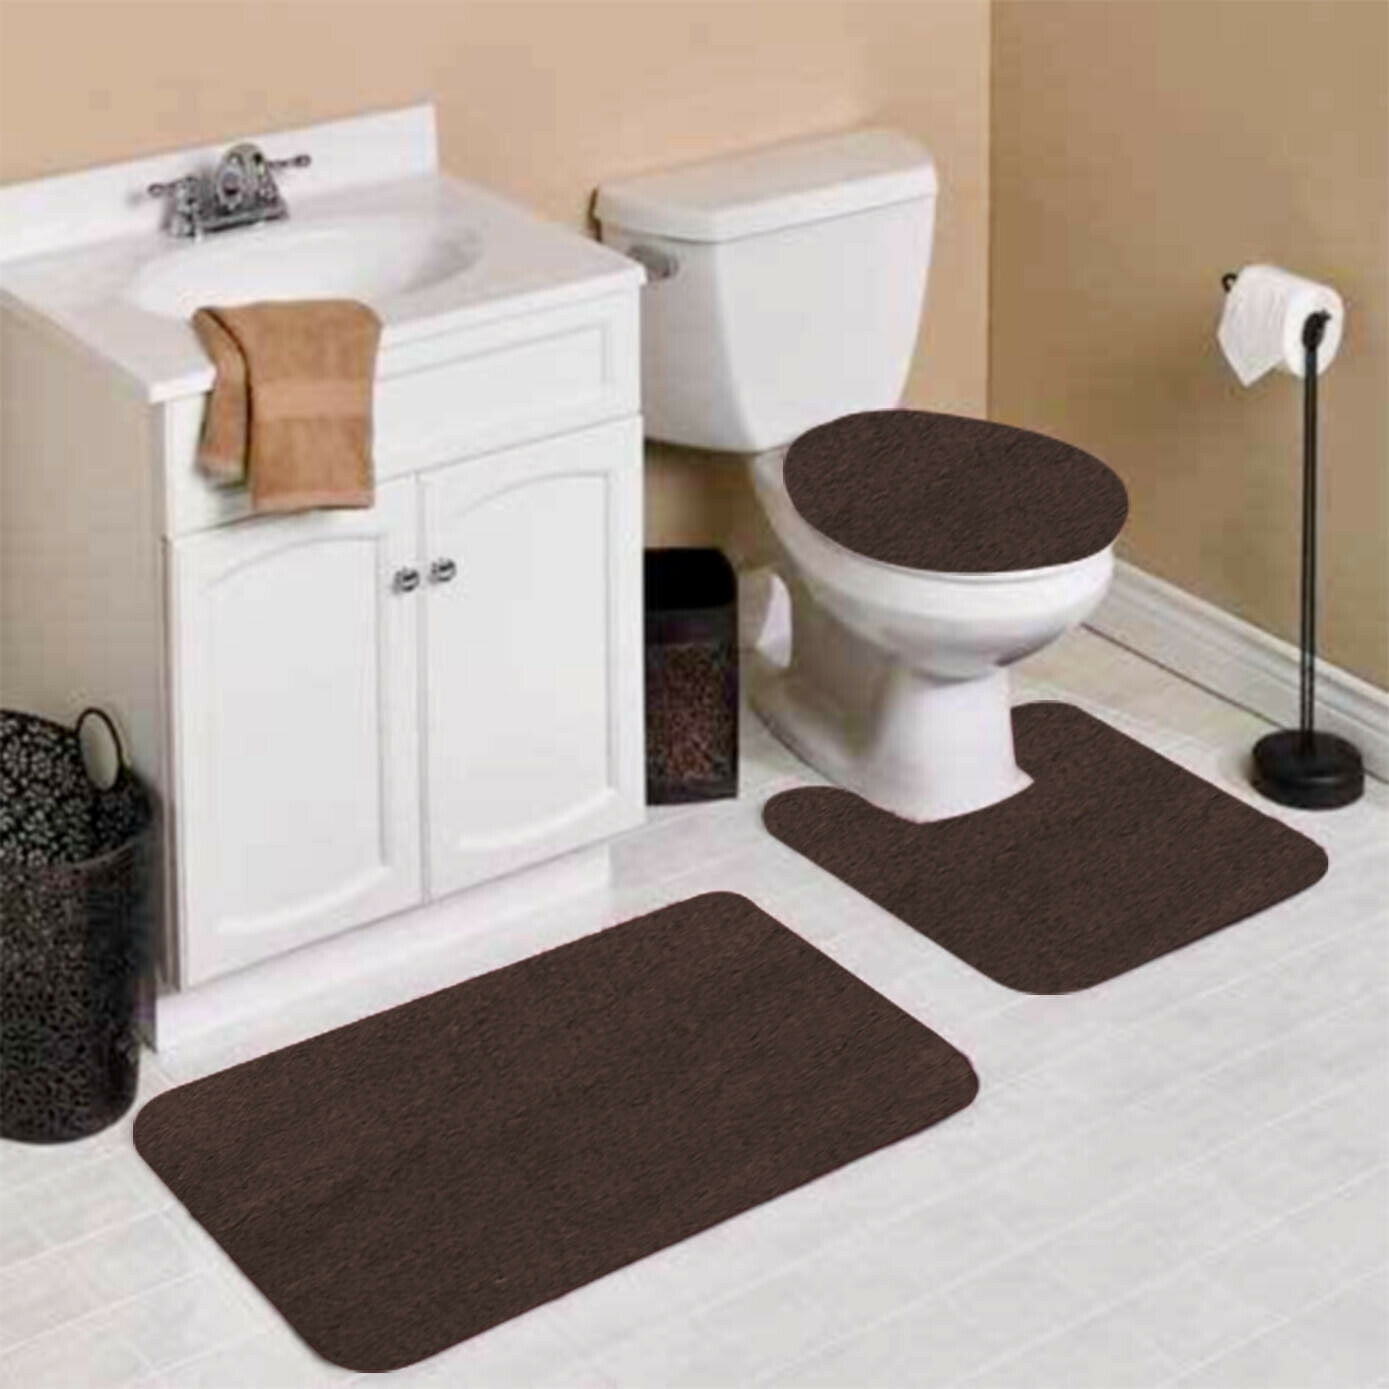 NEW BEAUTIFUL BATHROOM SET BANDED BATH MAT COUNTOUR RUG LID COVER #7 4 STYLES 